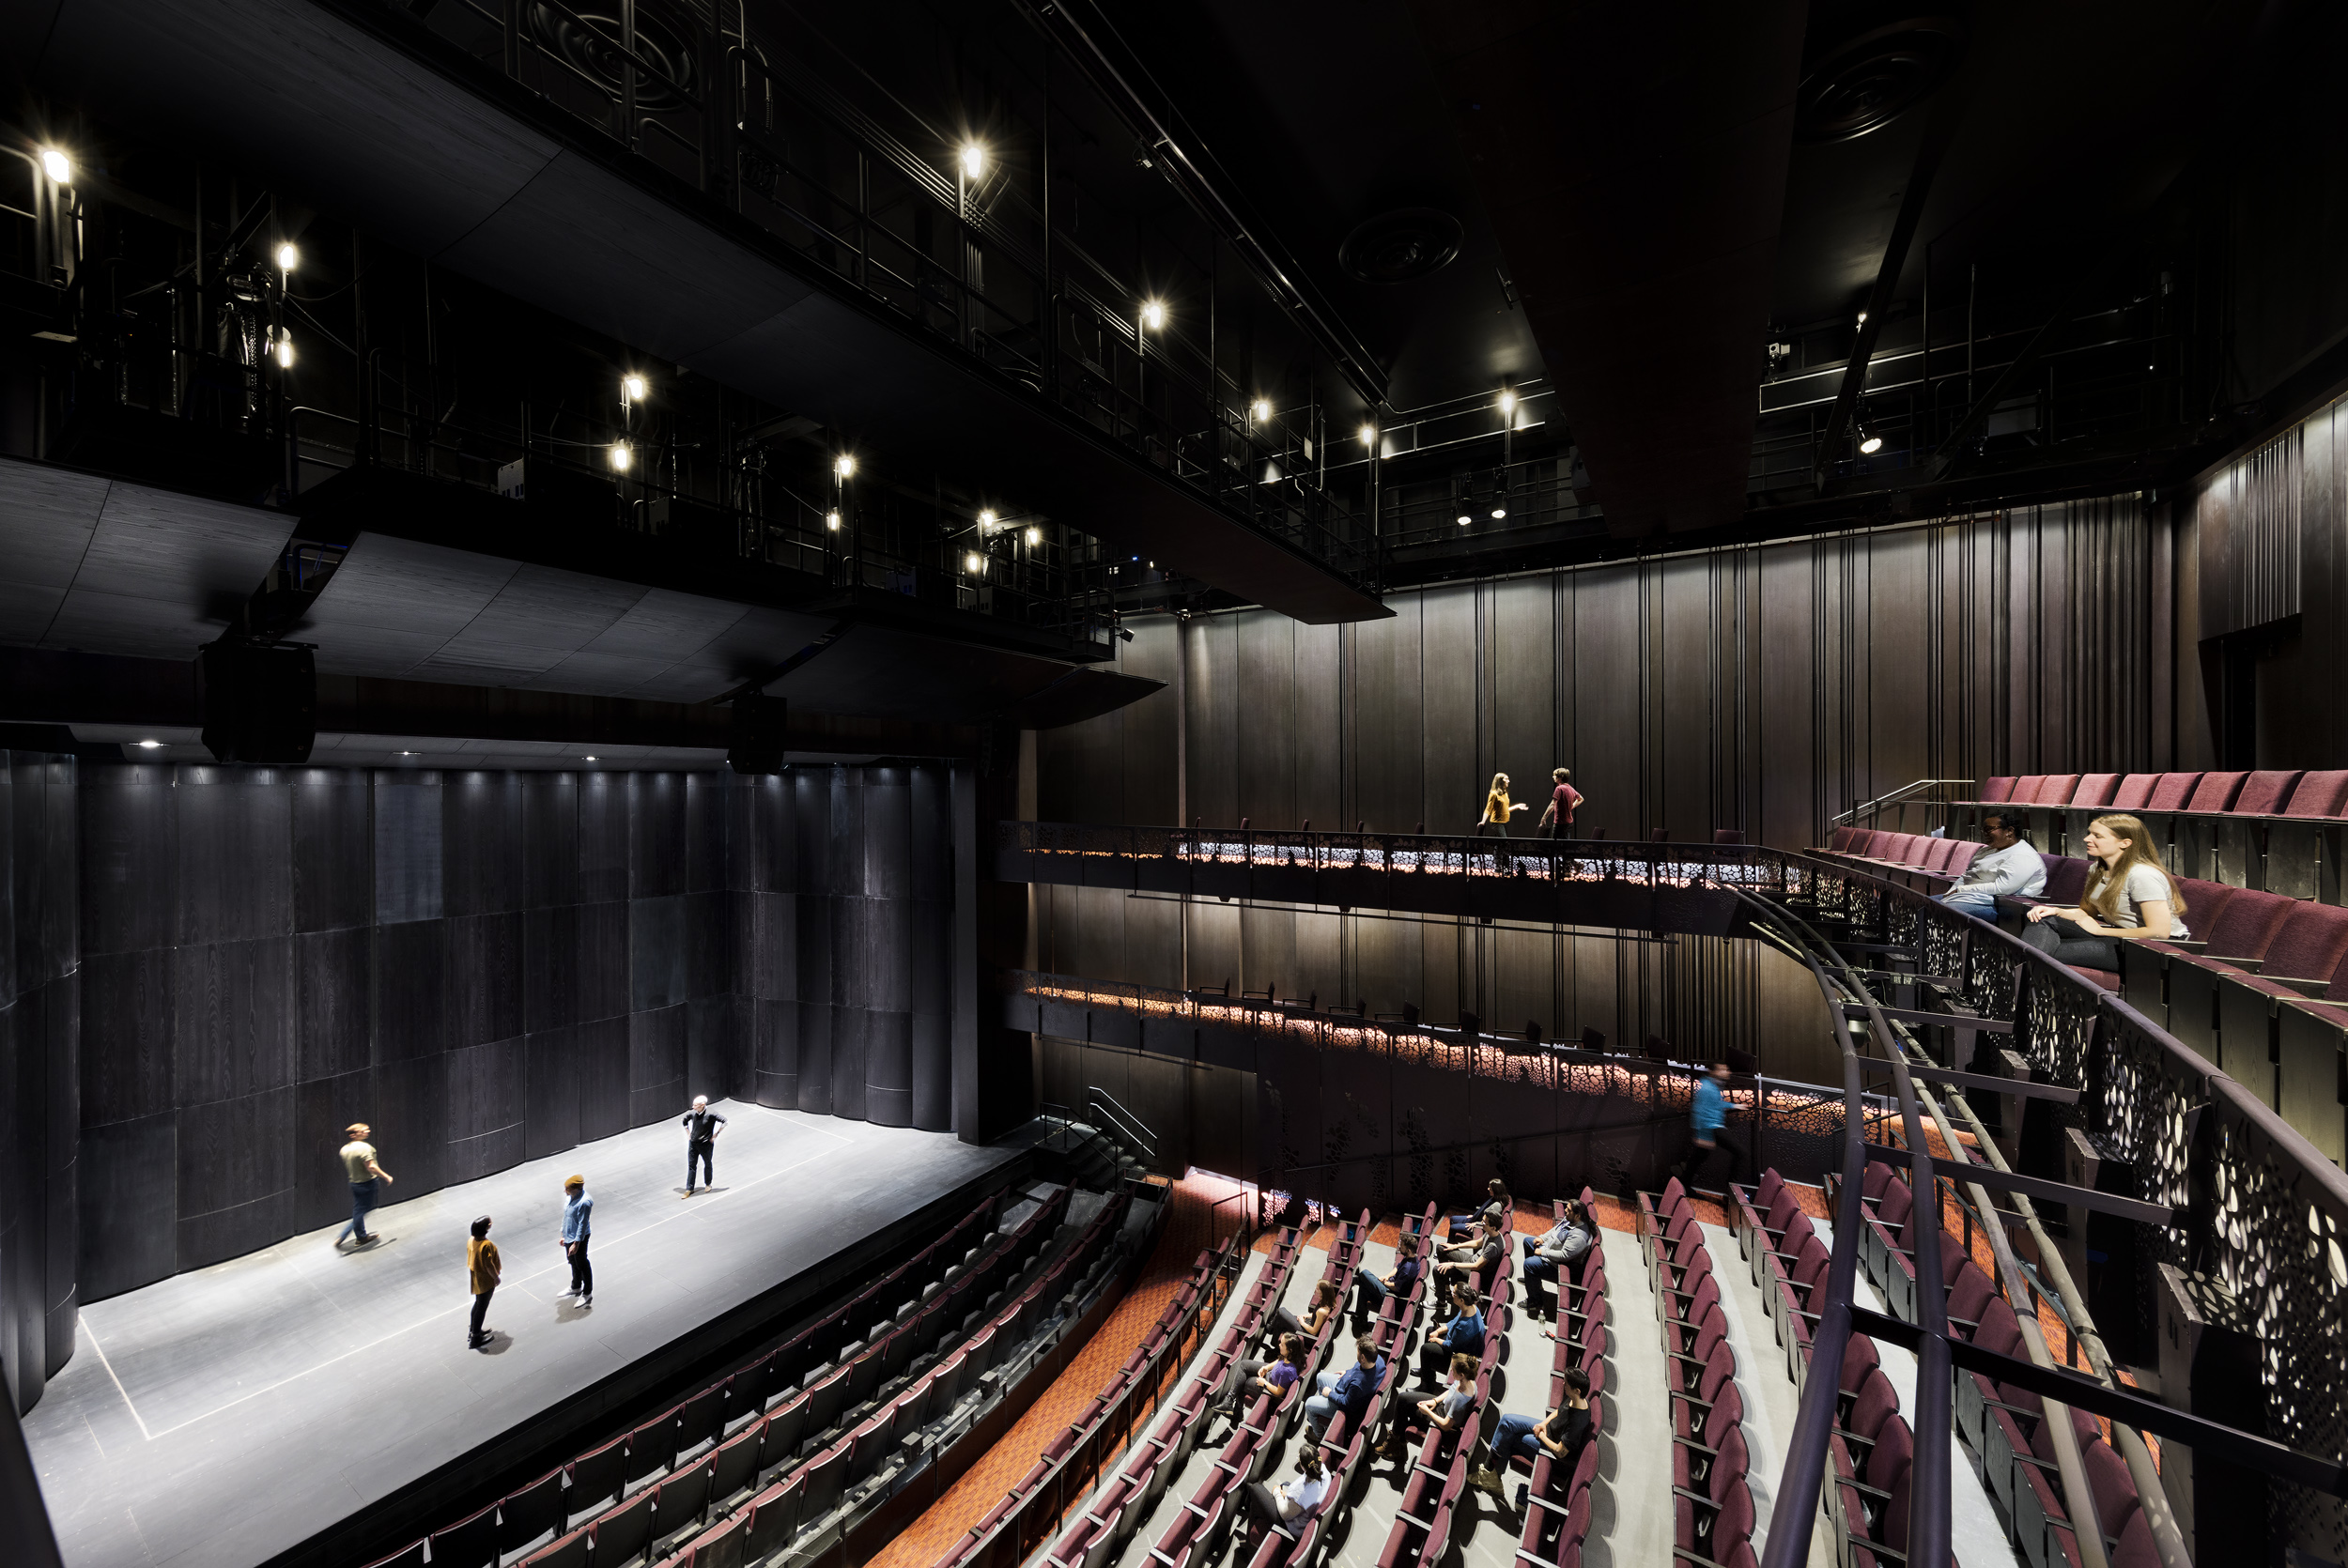 <p>The 350-seat theater is NYU's first professional-level proscenium, fly-loft theatre for student productions. <small>&copy; Connie Zhou / JBSA</small></p>